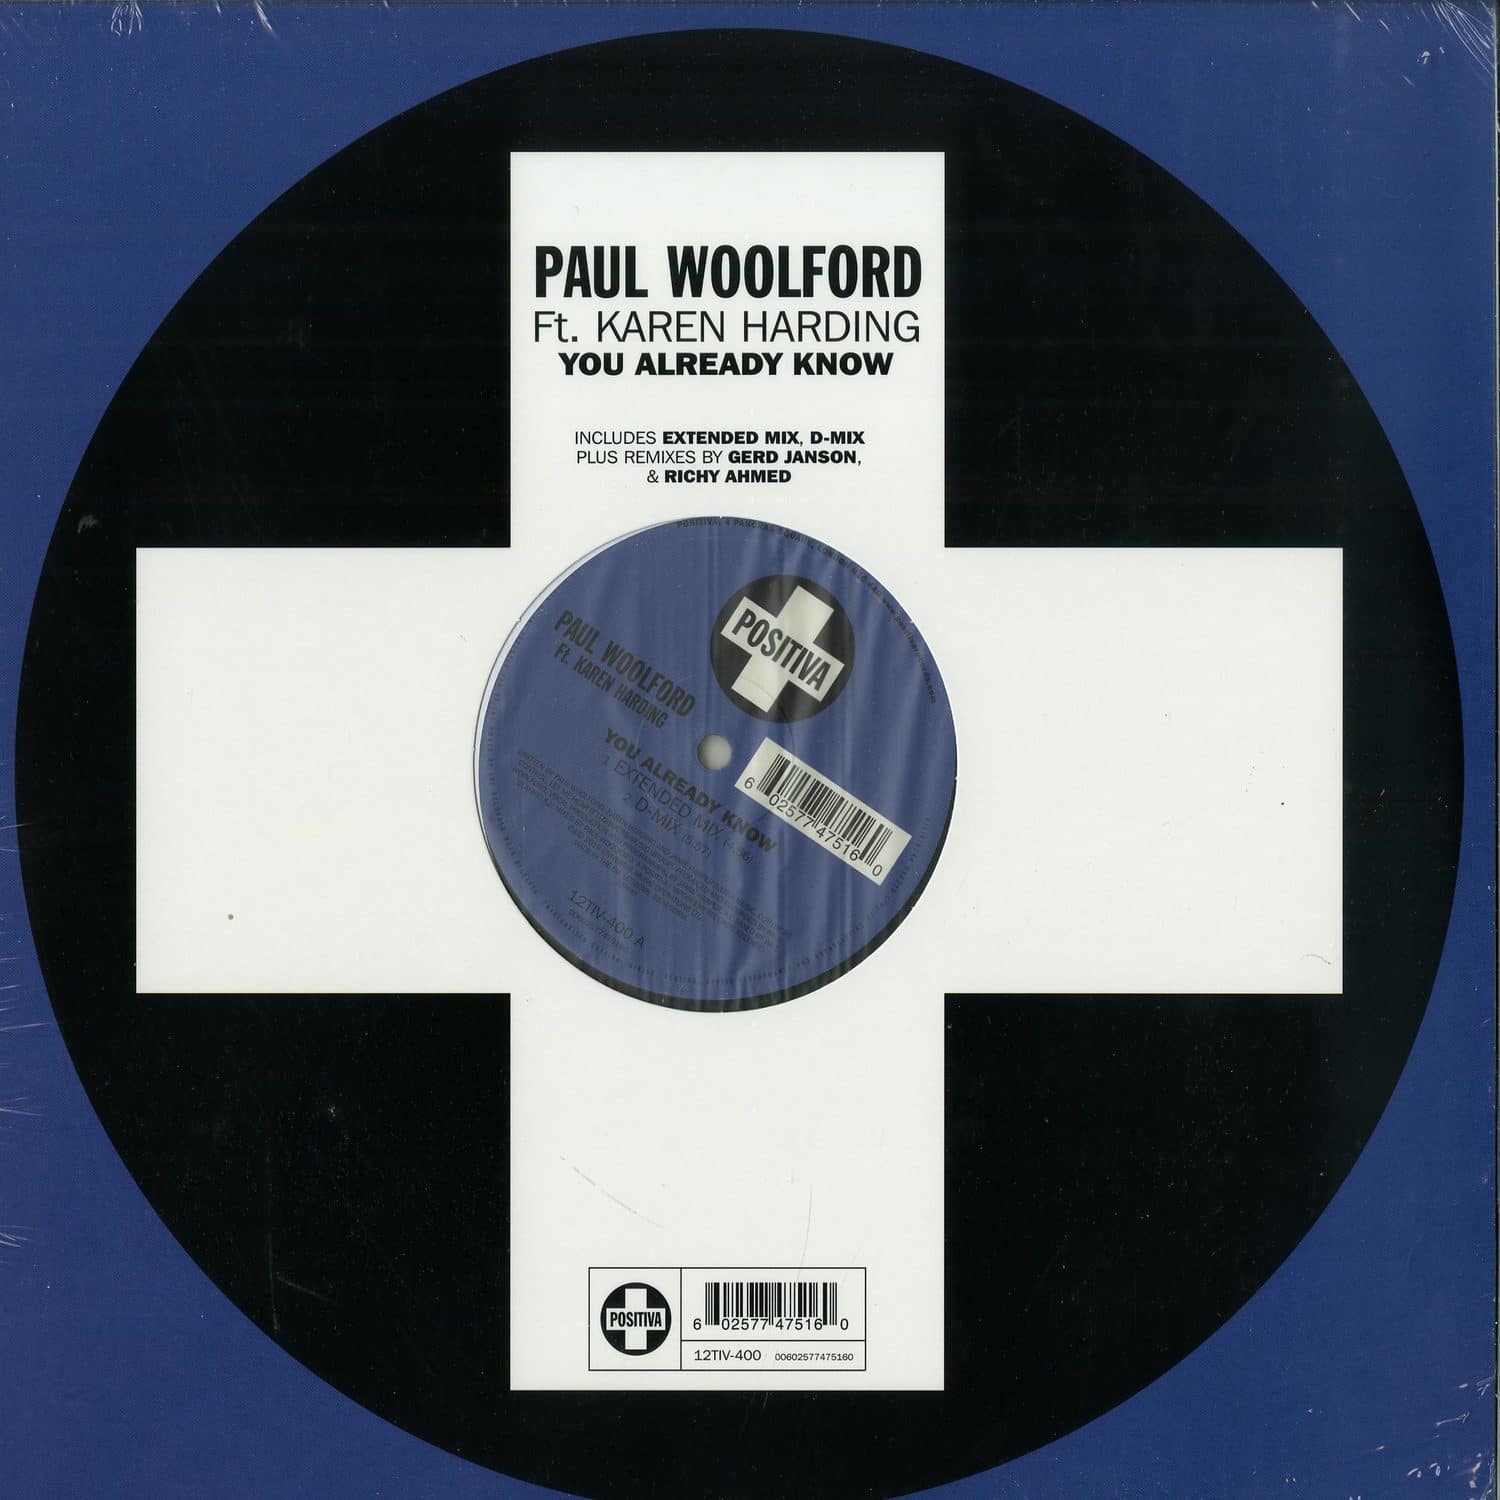 Paul Woolford - YOU ALREADY KNOW